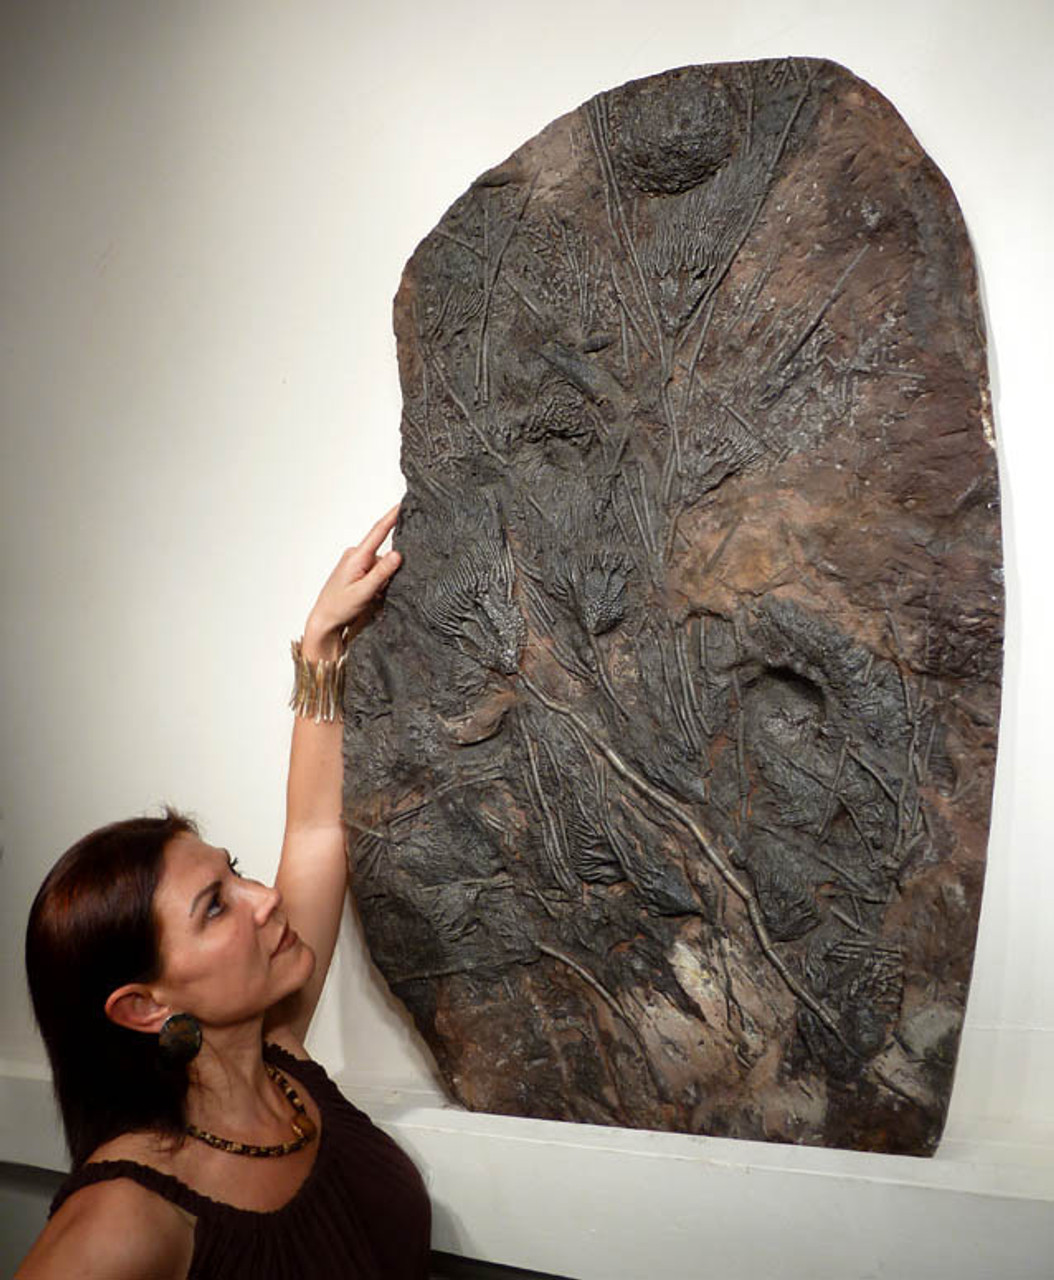 GIANT 420 MILLION YEAR PREHISTORIC SEA LIFE FOSSIL WITH EXTINCT CRINOID SEA LILIES AND CORAL *CRI032